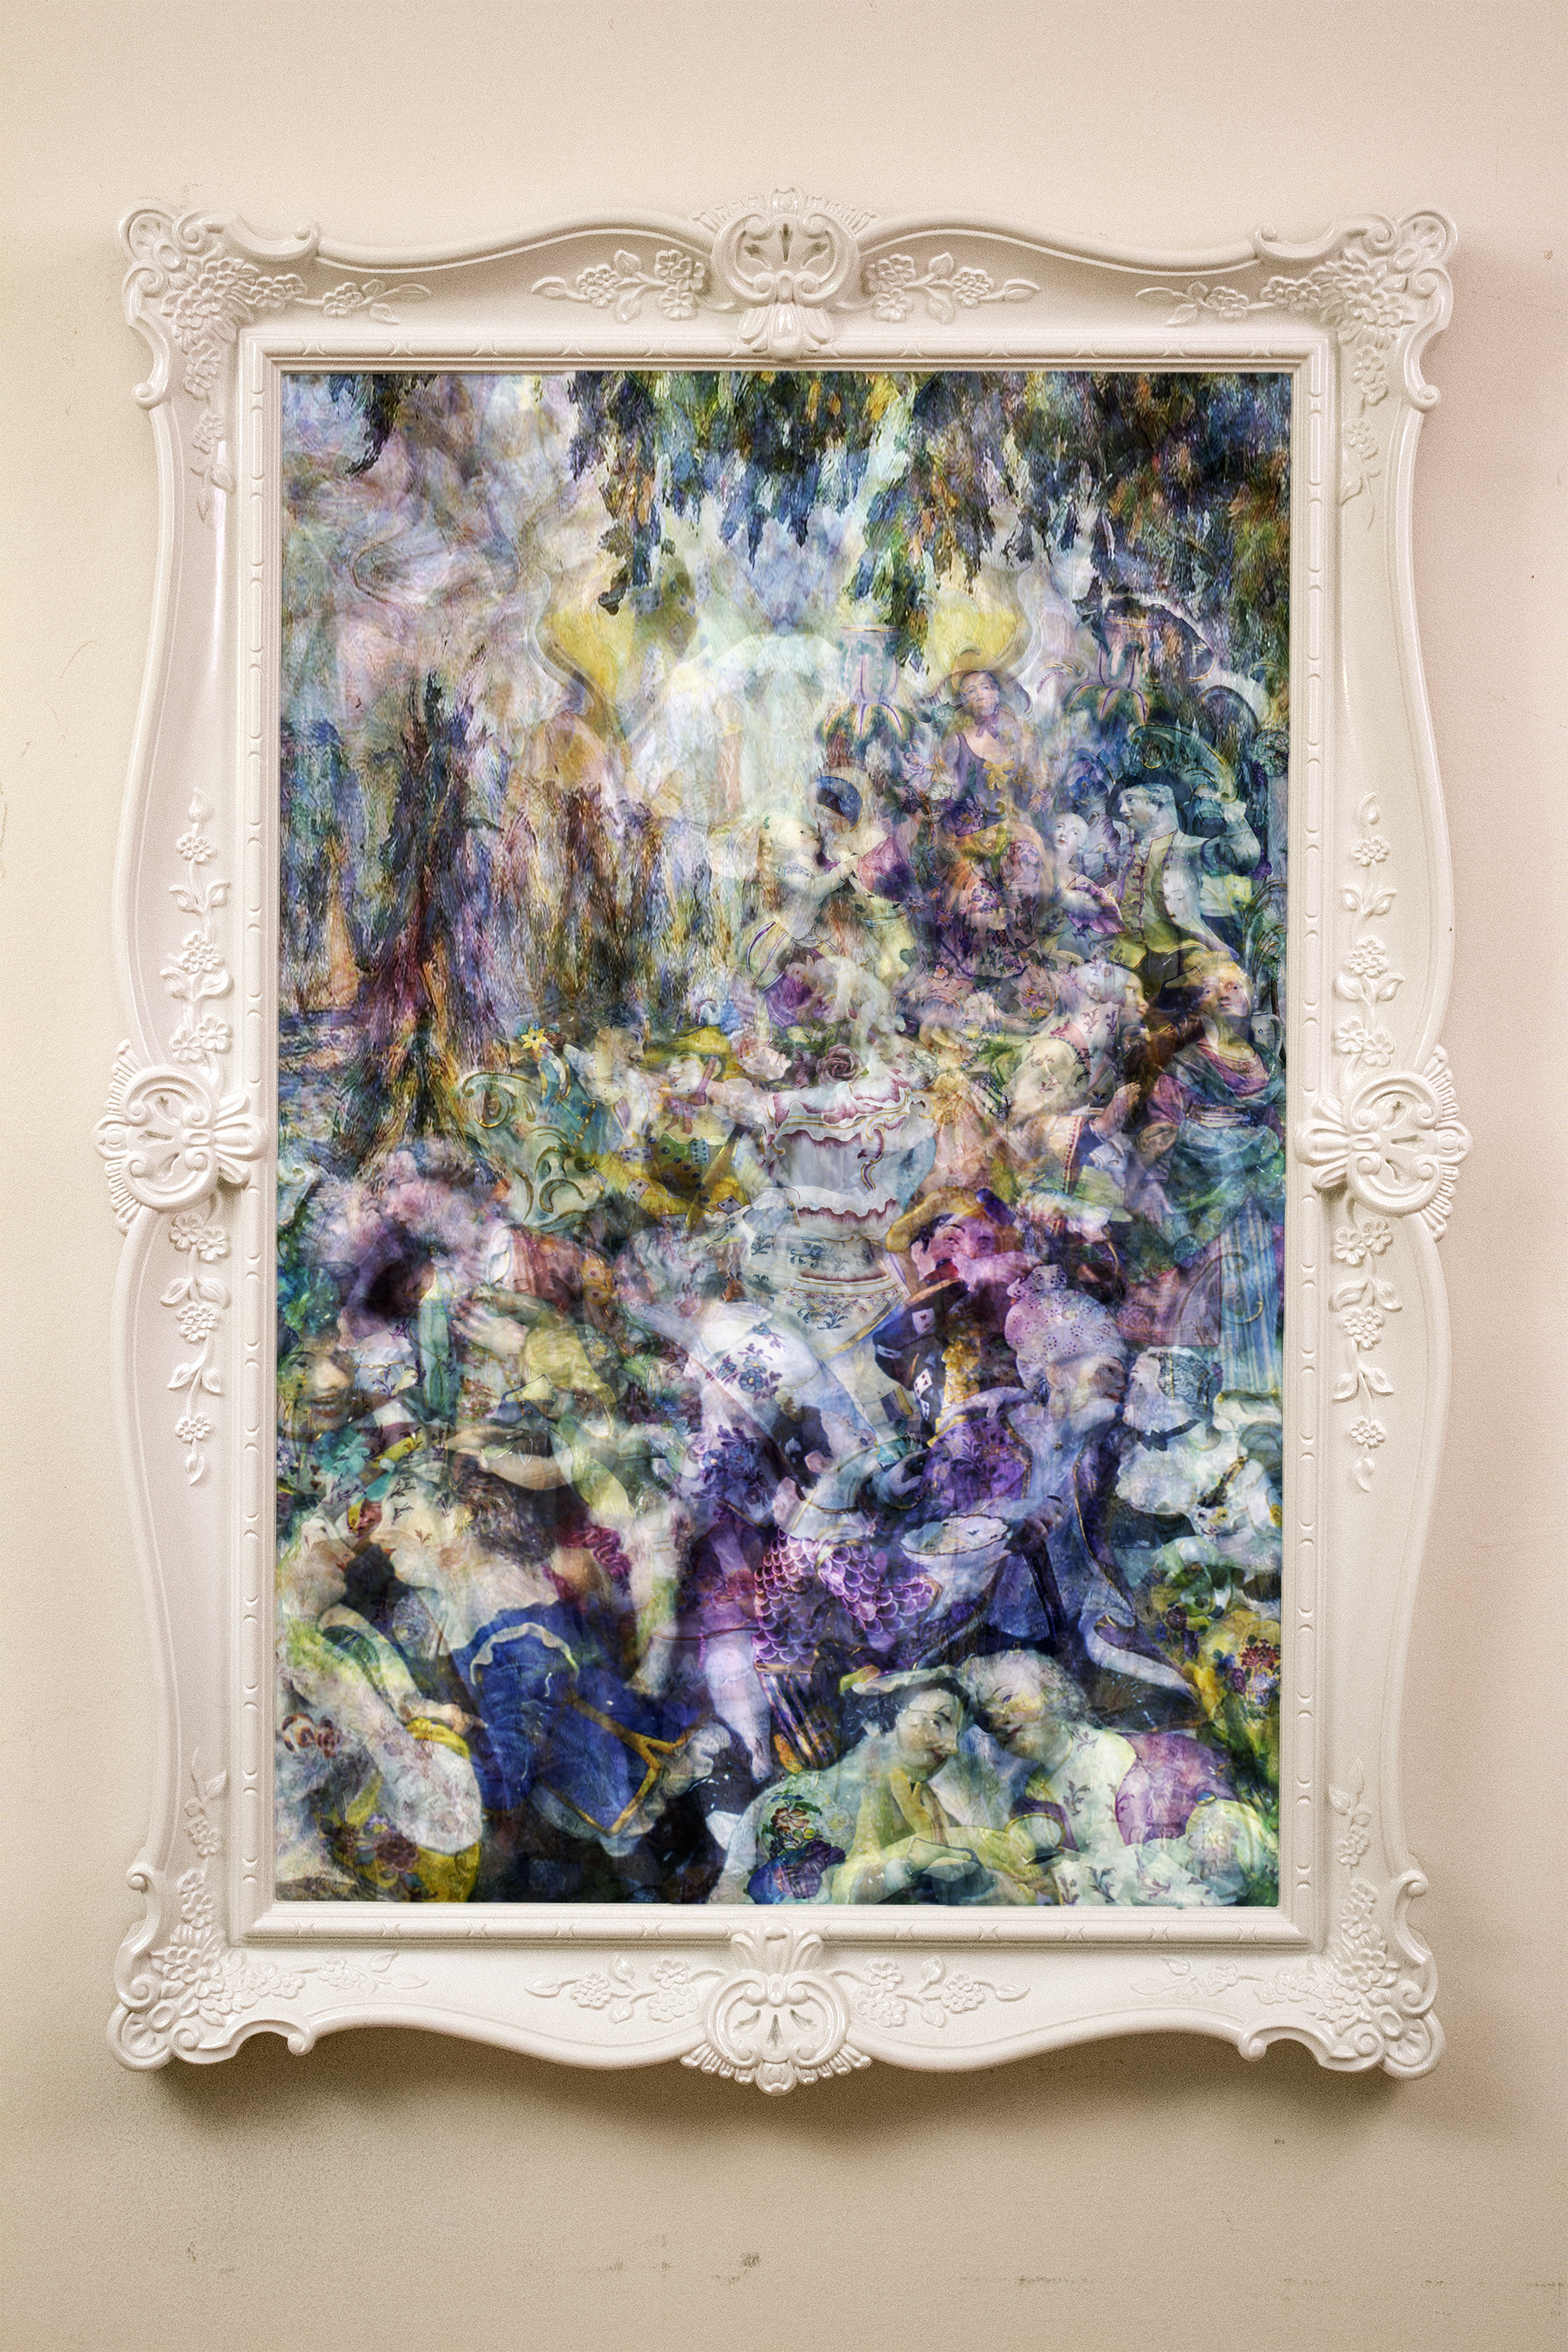   The Impetuous Lovers , 2015.  Pigment Print on Luster Paper  30 in. x 42 in. (includes frame) 